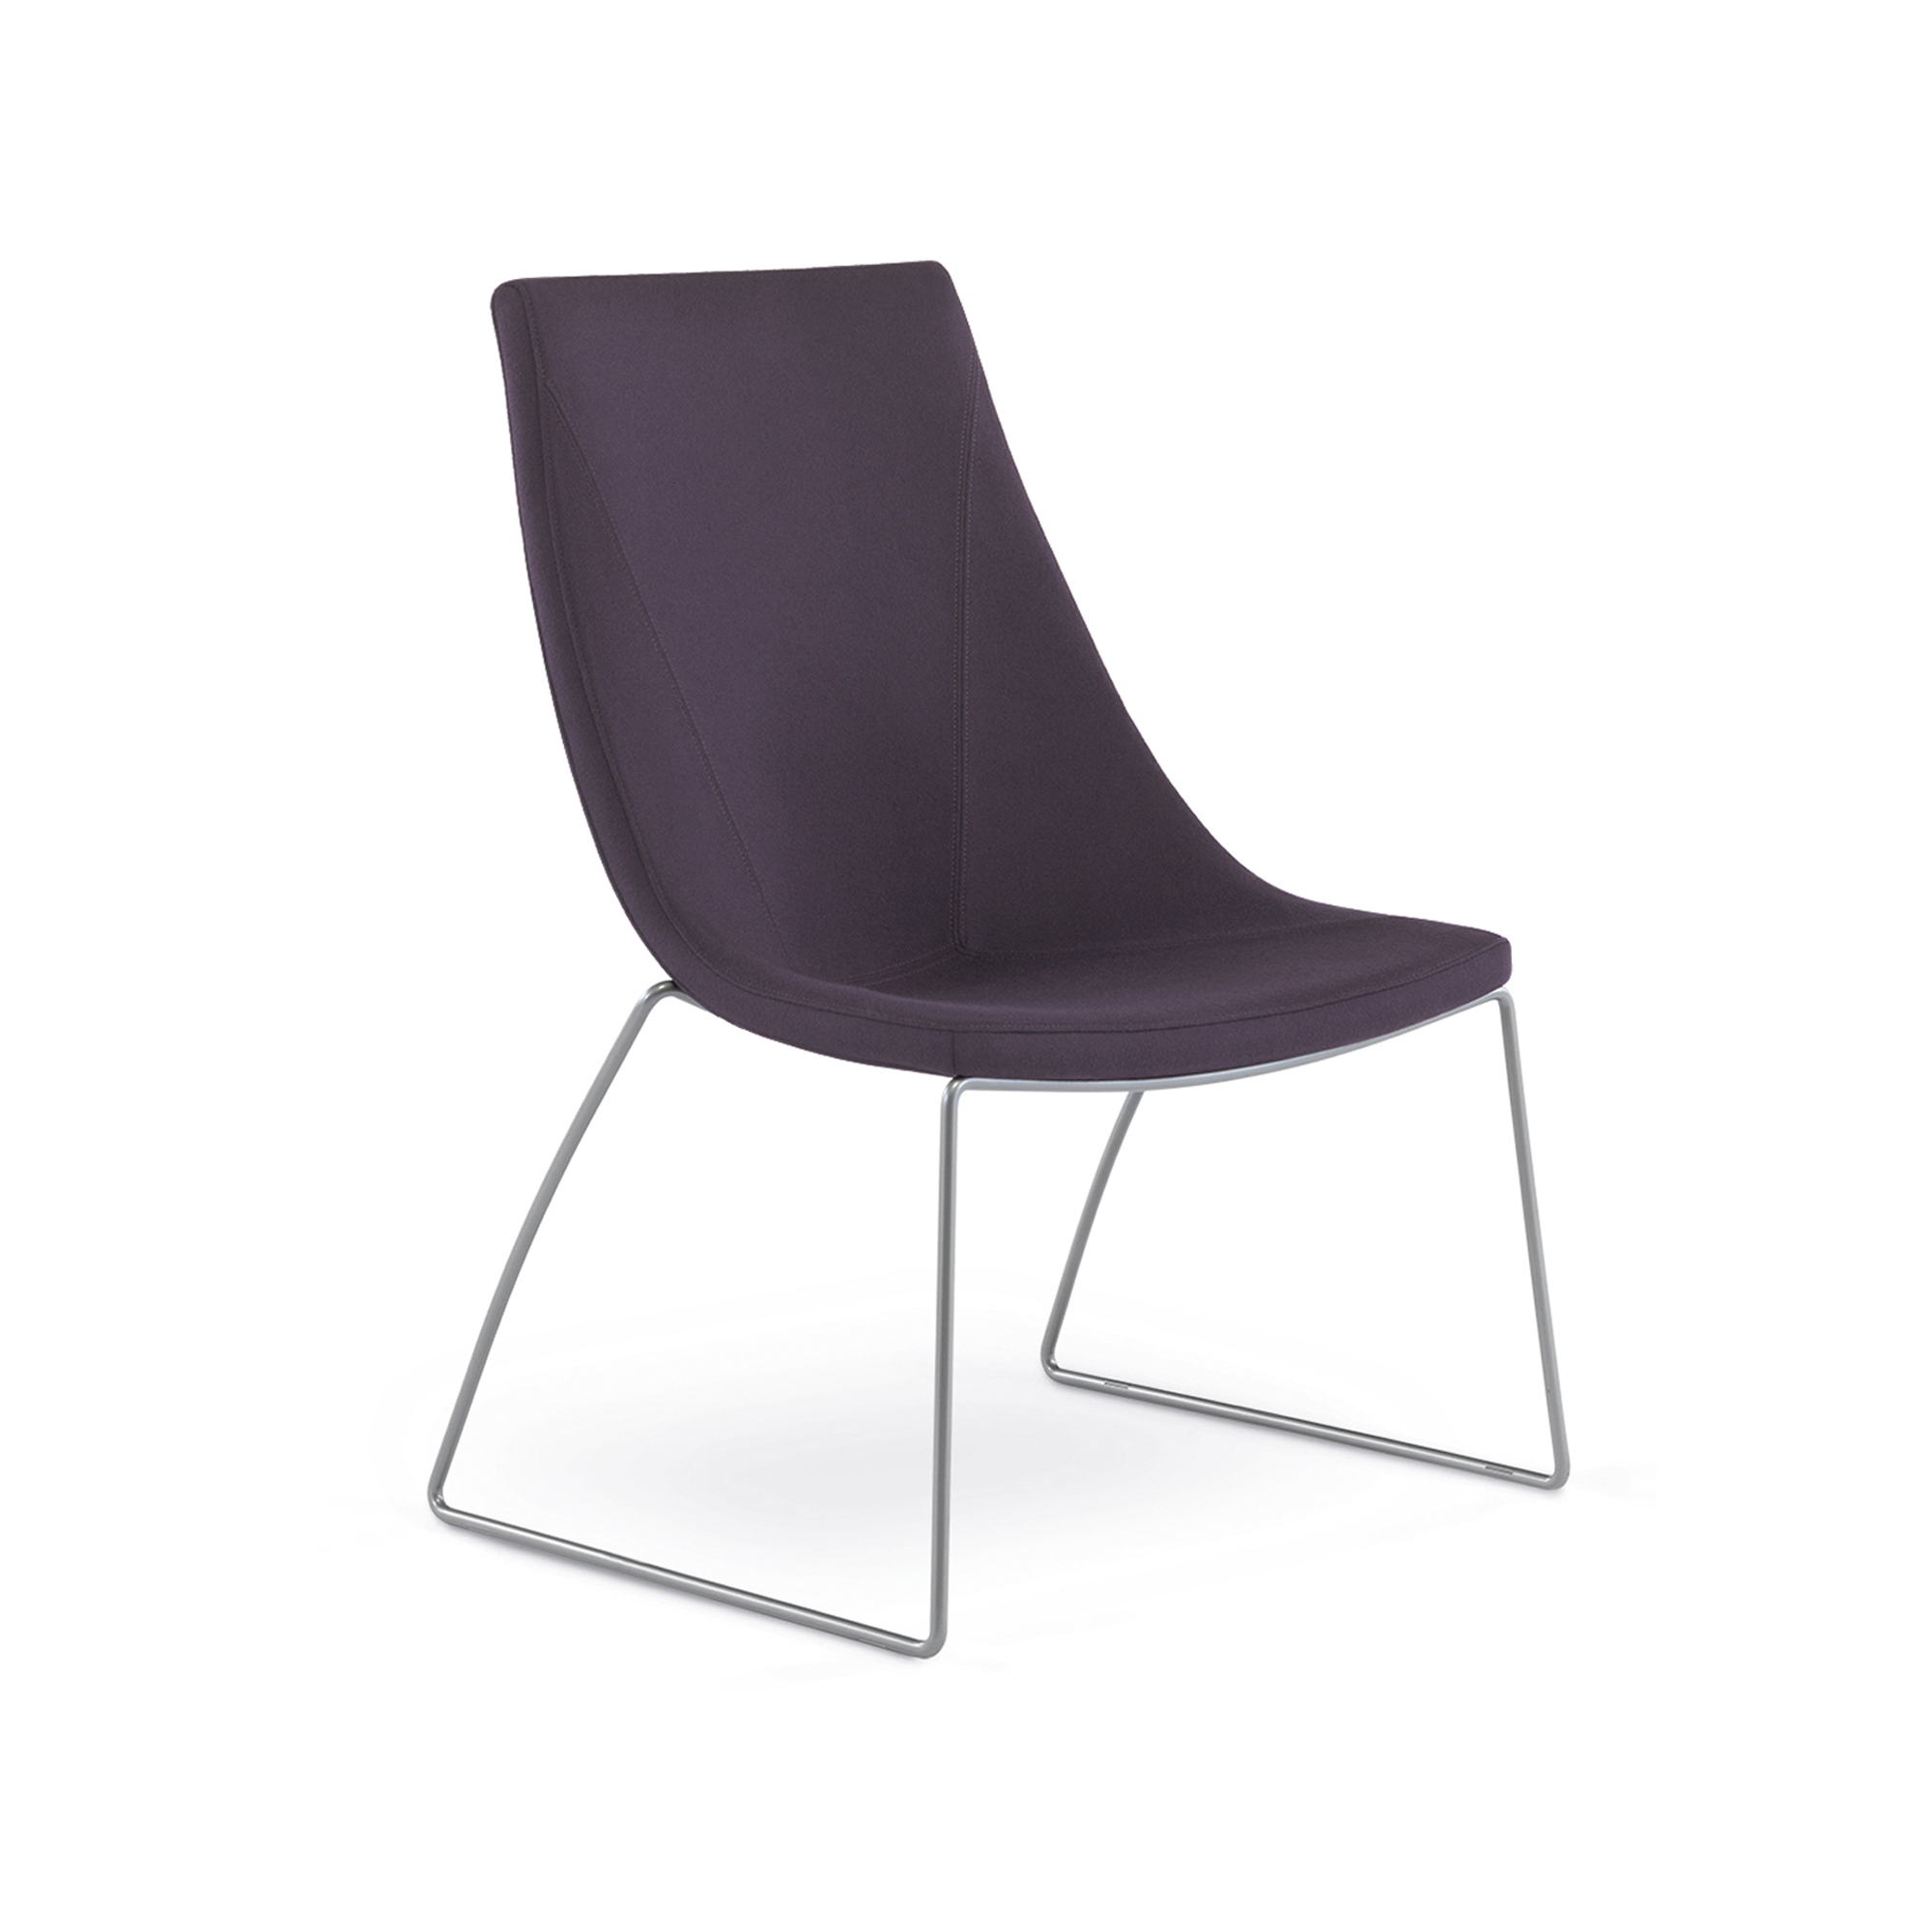 Chirp Lounge Chair, Sled Base, Side Profile